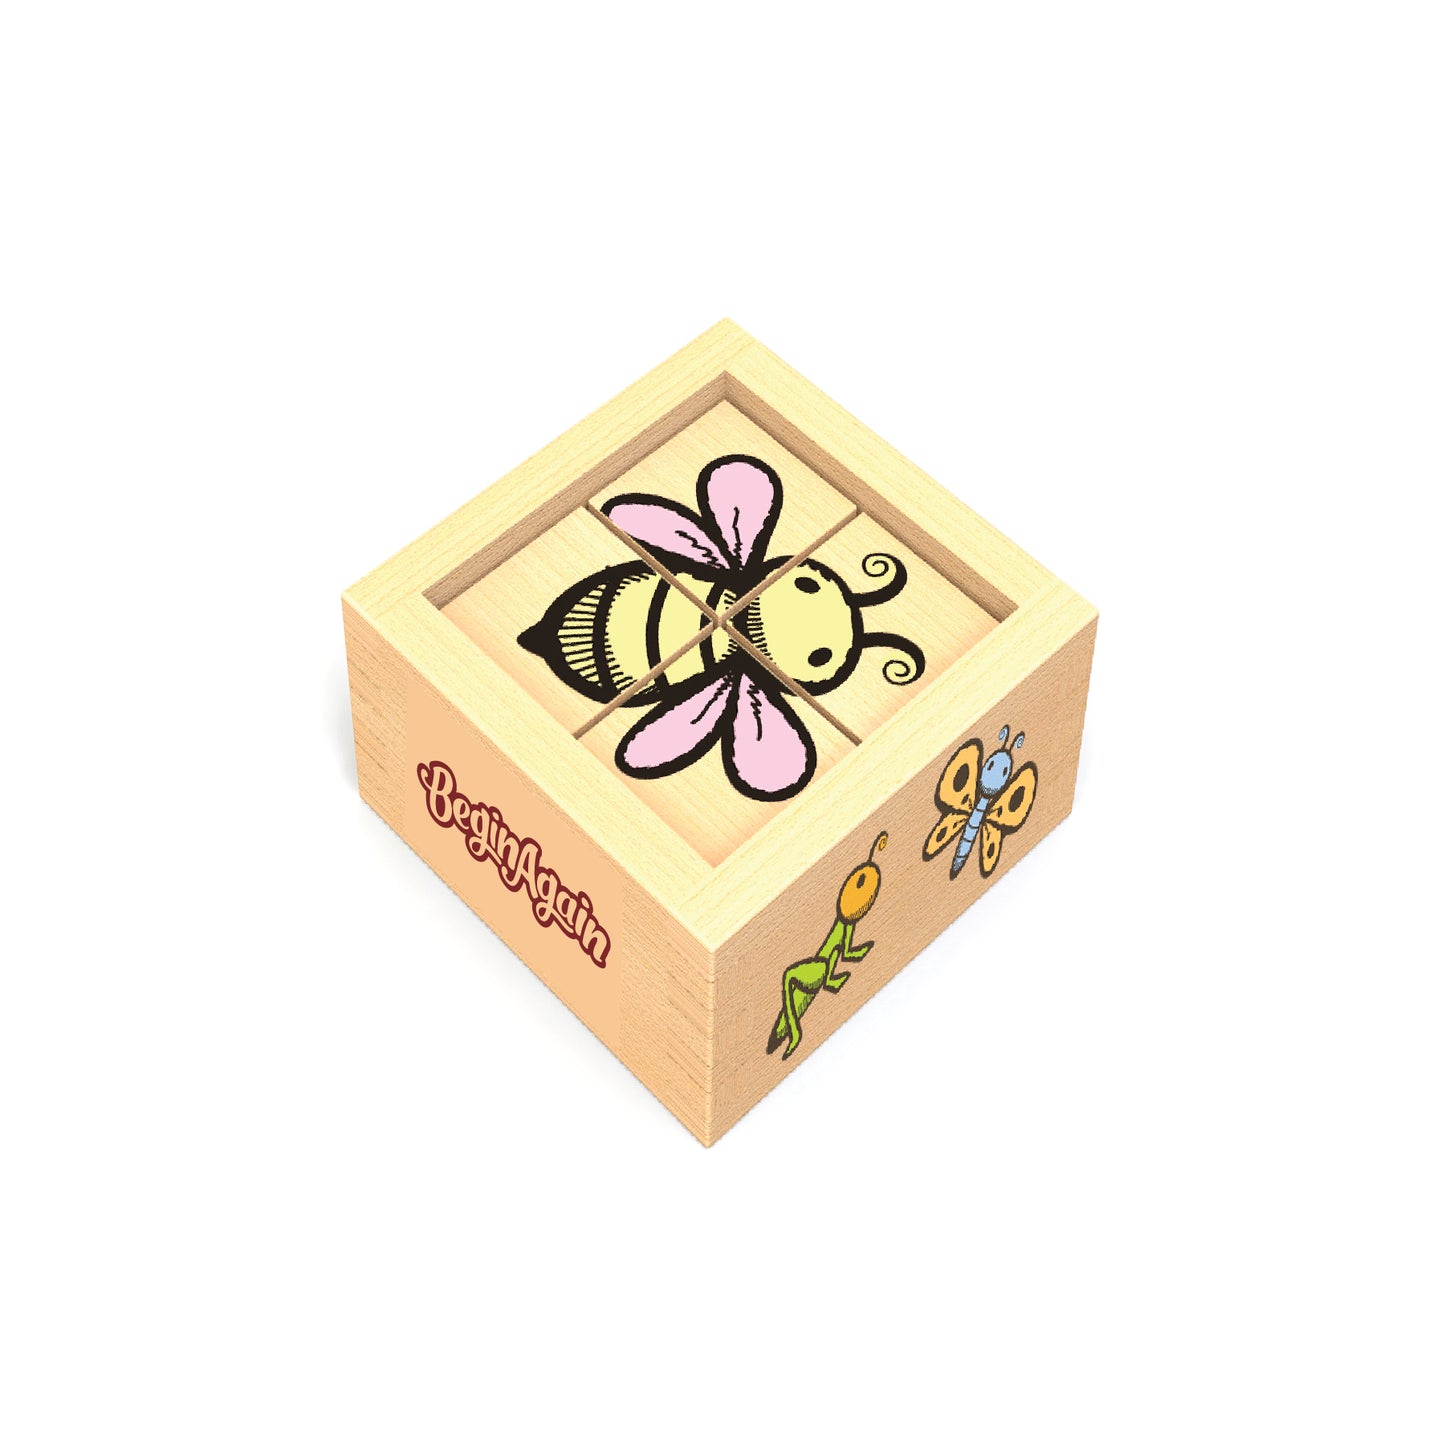 Wooden box holds wooden blocks that, together, form a picture of a bee